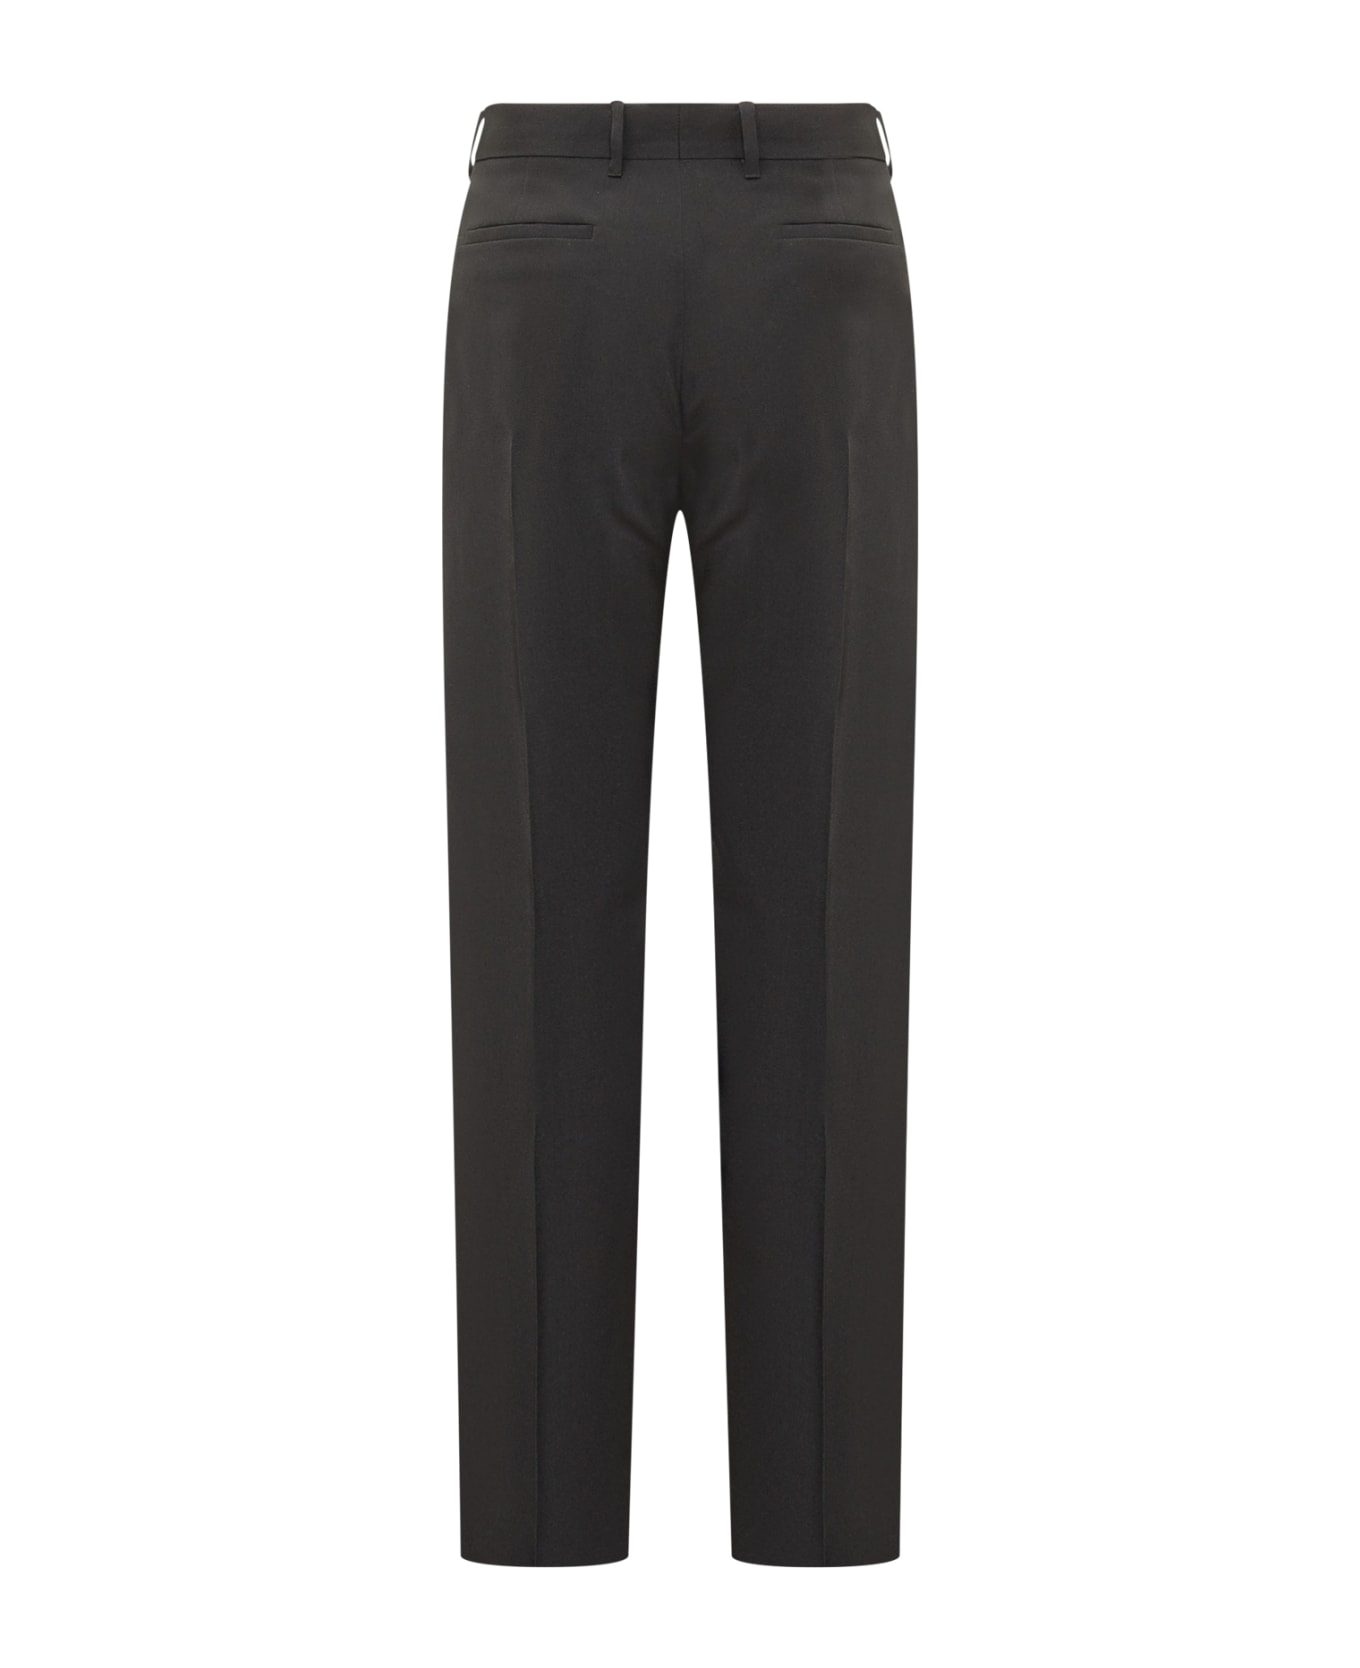 Givenchy Tailored Trousers - Black ボトムス